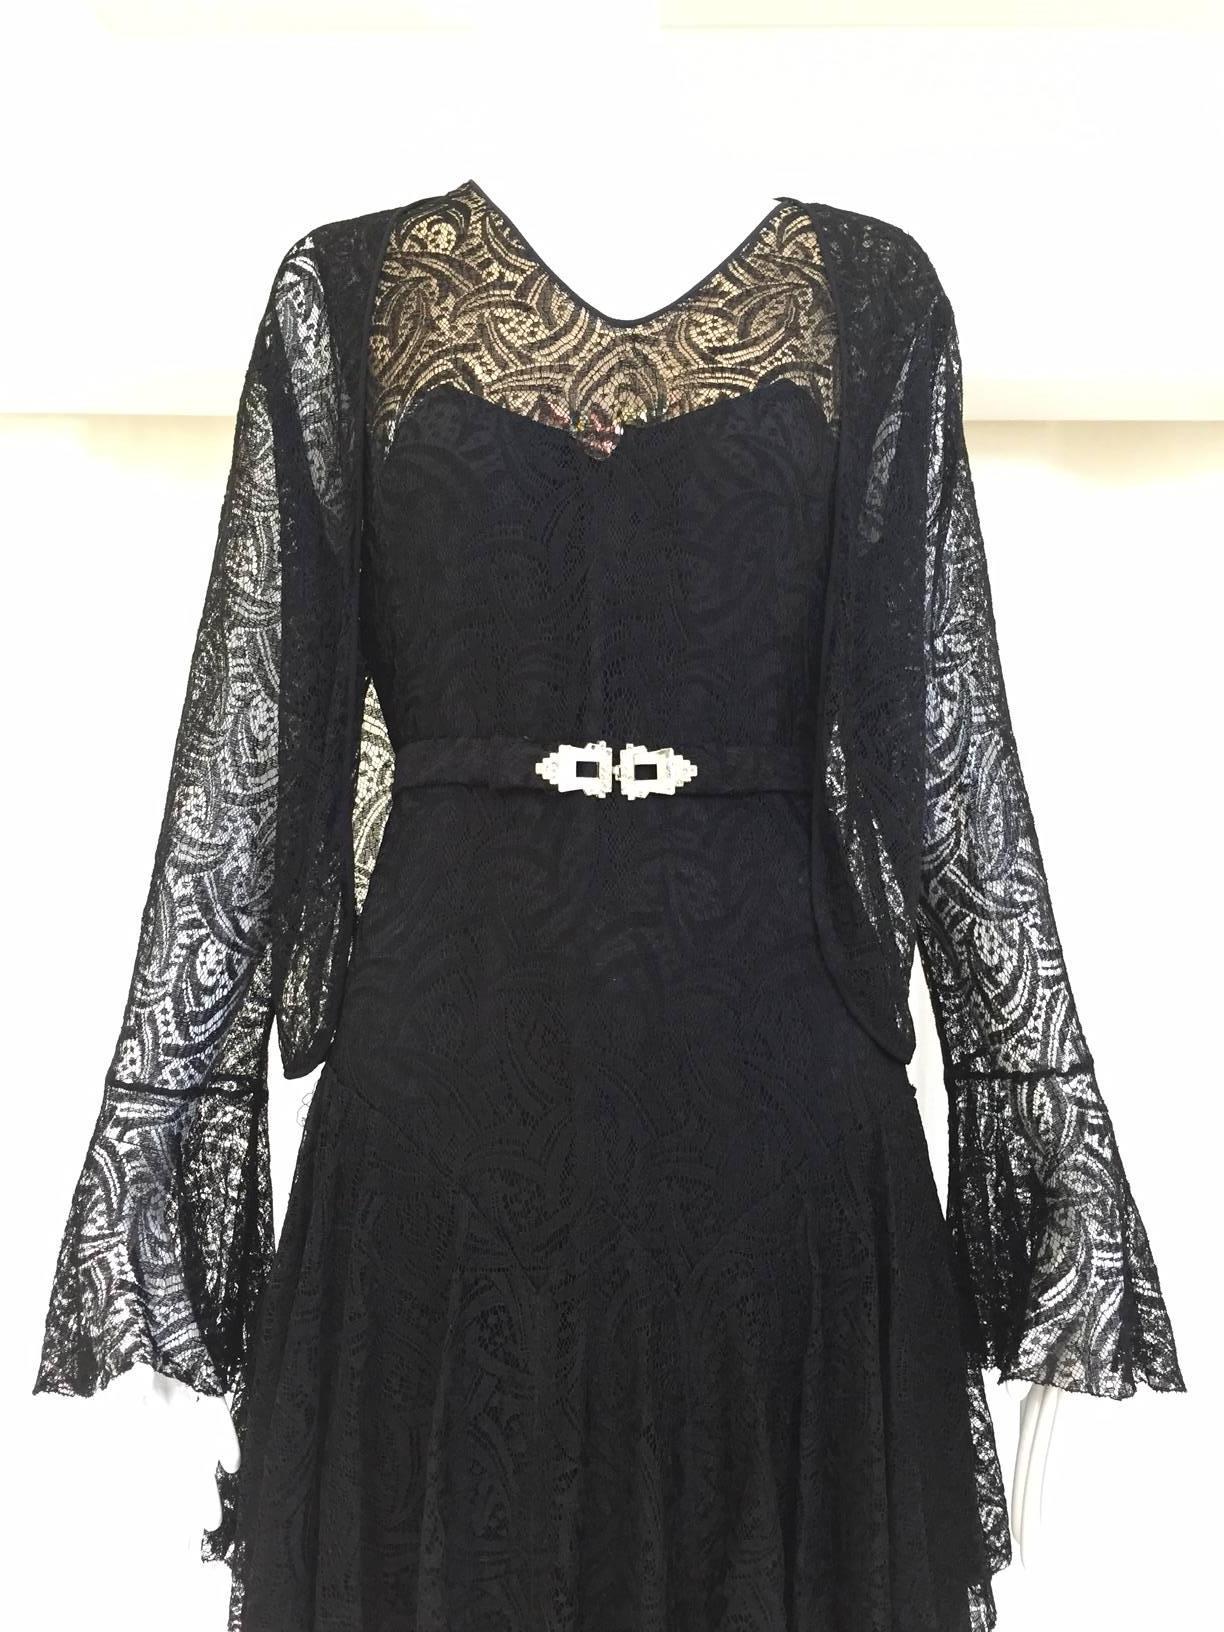 Simple 1930s black lace cocktail dress with lace cardigan jacket. Belt need new rhinestones. Snaps on the side. no zipper.  Fit size 6
Bust: 36